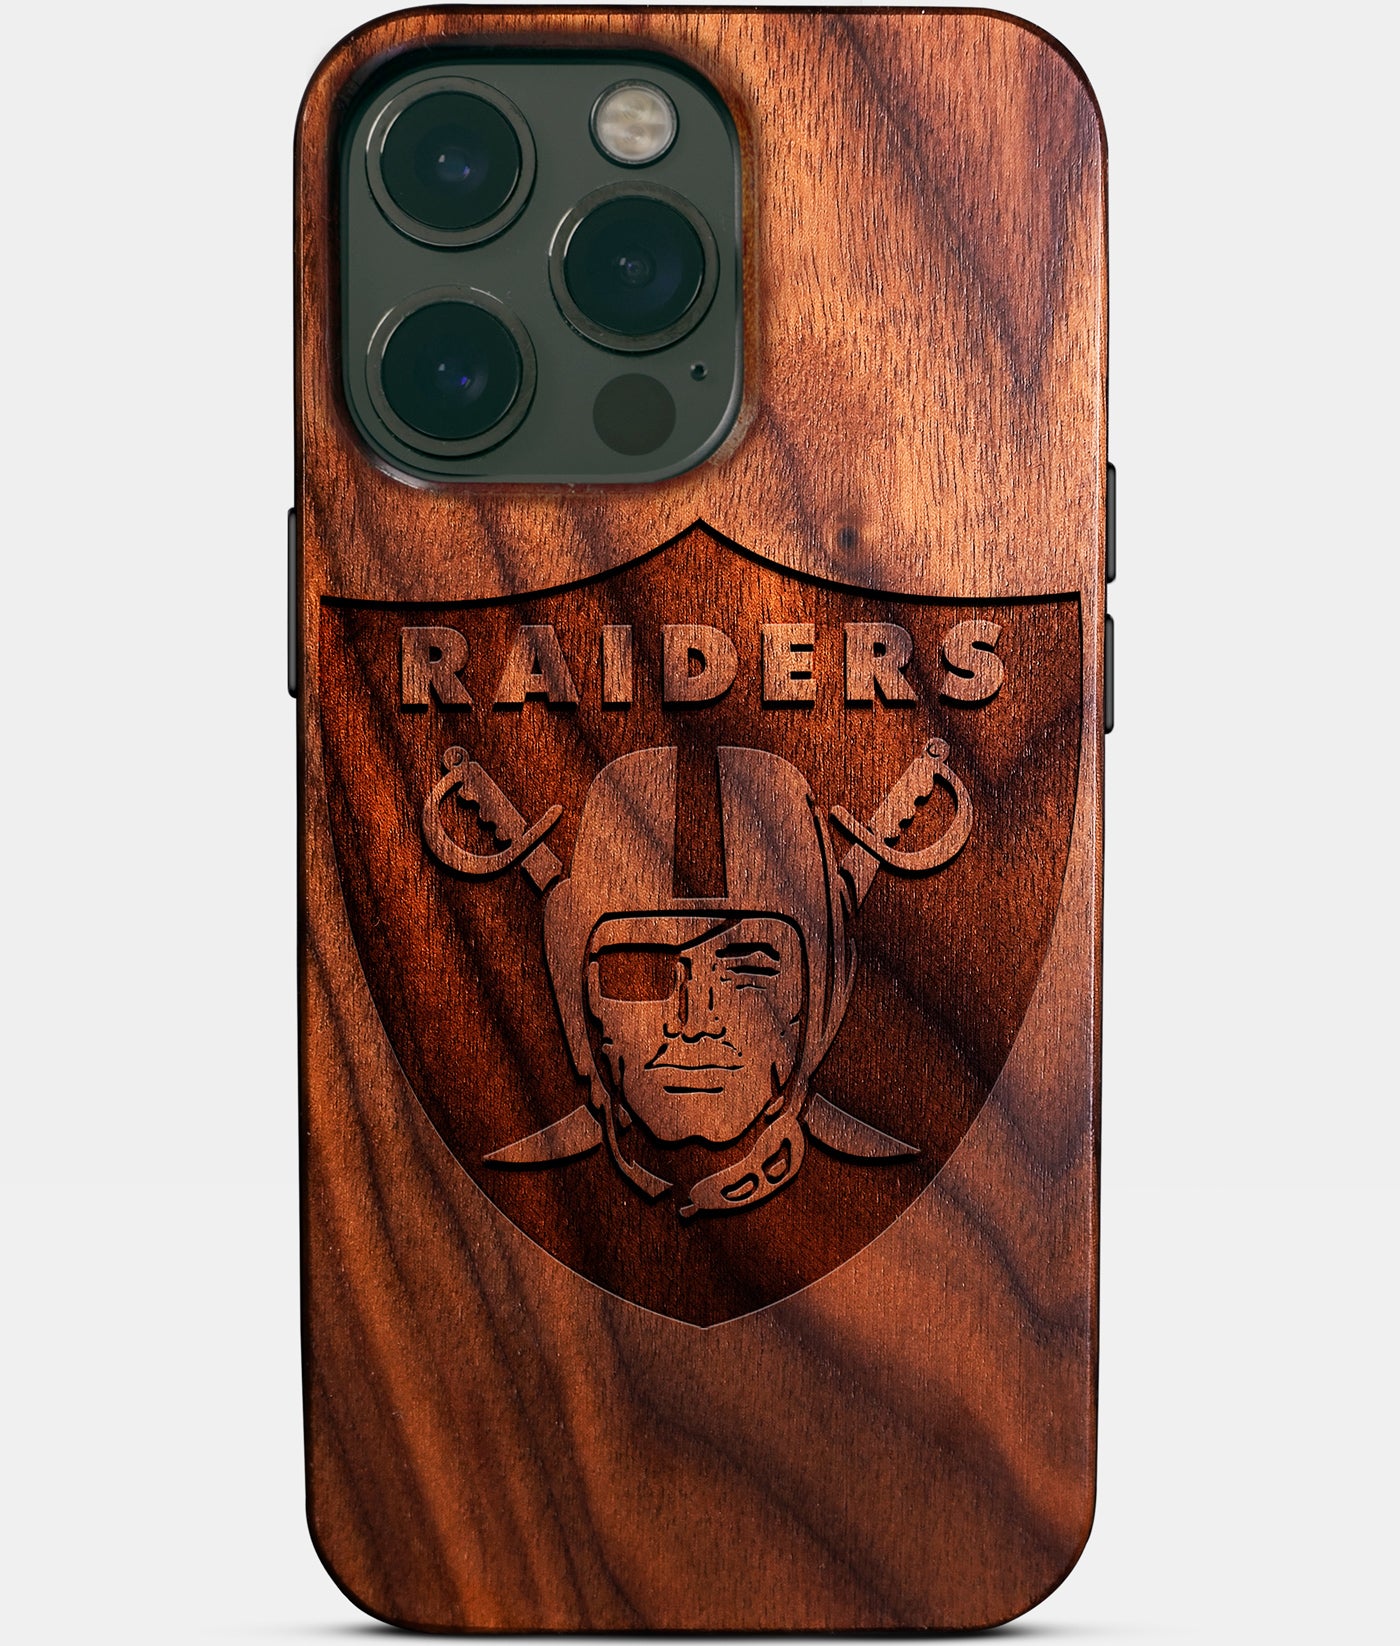 Custom Las Vegas Raiders iPhone 14/14 Pro/14 Pro Max/14 Plus Case - Wood Las Vegas Raiders Cover - Eco-friendly Las Vegas Raiders iPhone 14 Case - Carved Wood Custom Las Vegas Raiders Gift For Him - Monogrammed Personalized iPhone 14 Cover By Engraved In Nature